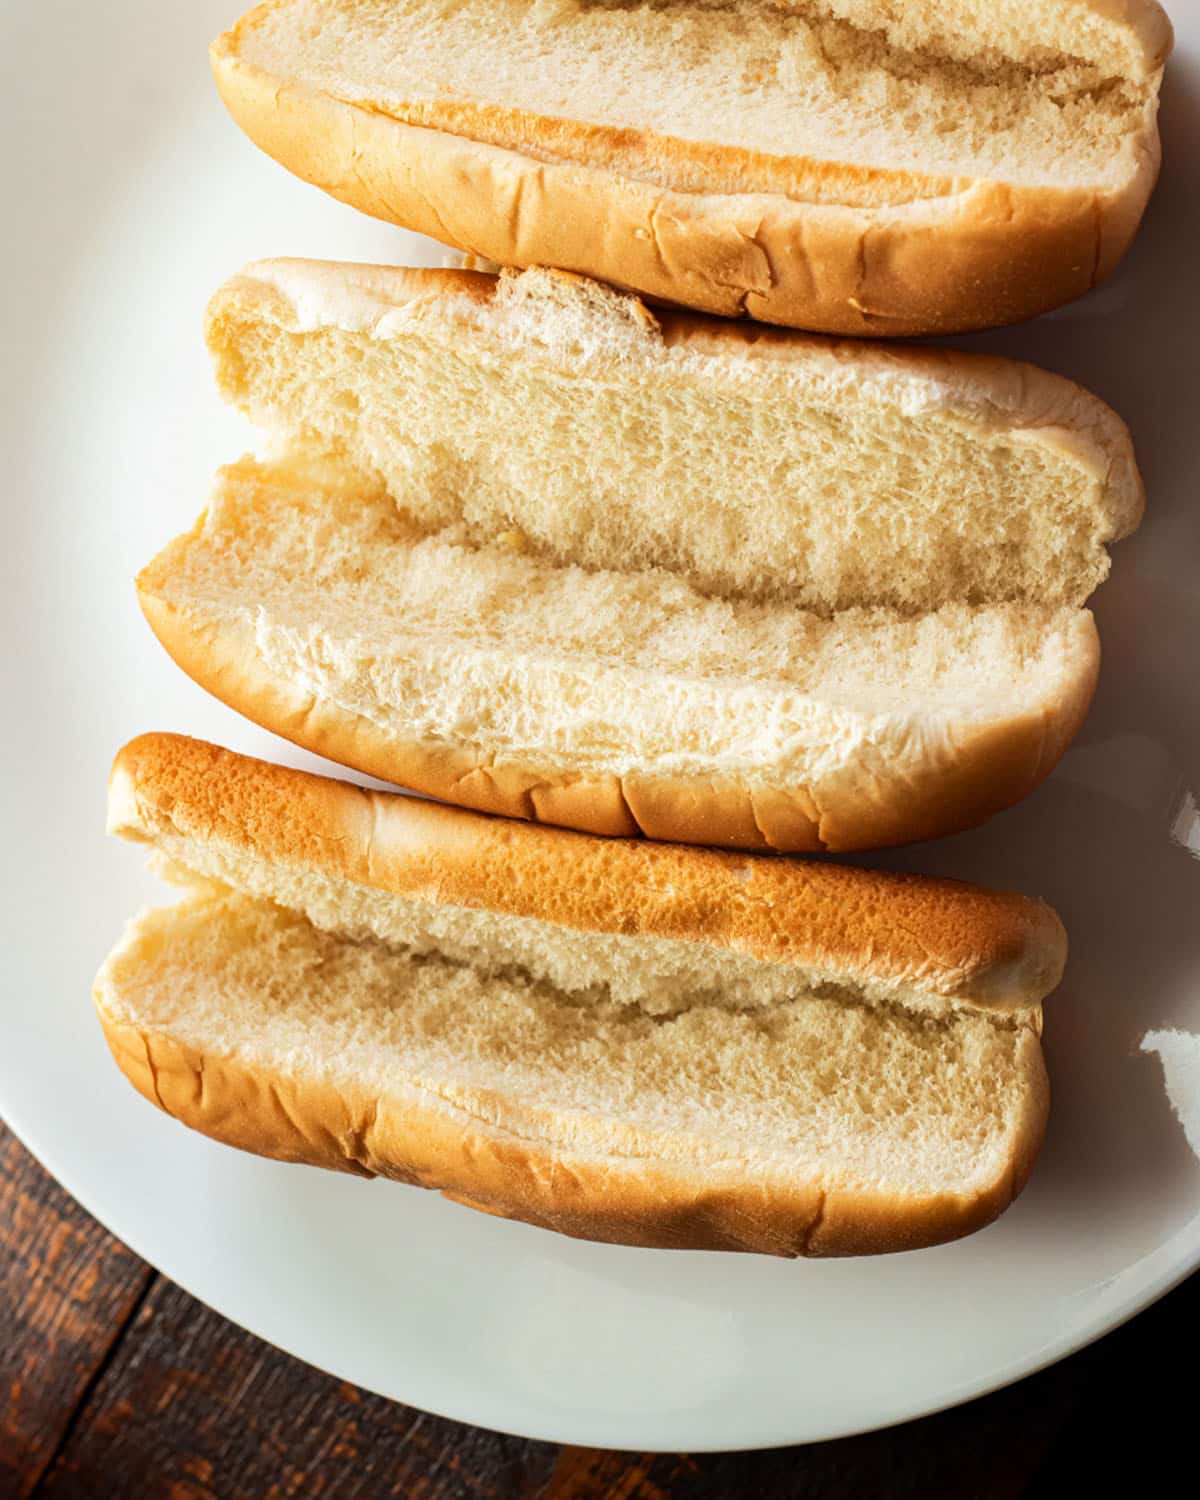 Typically, hot dog buns last about one or two weeks after expiration. Most hot dog buns contain preservatives that help to extend their shelf life.